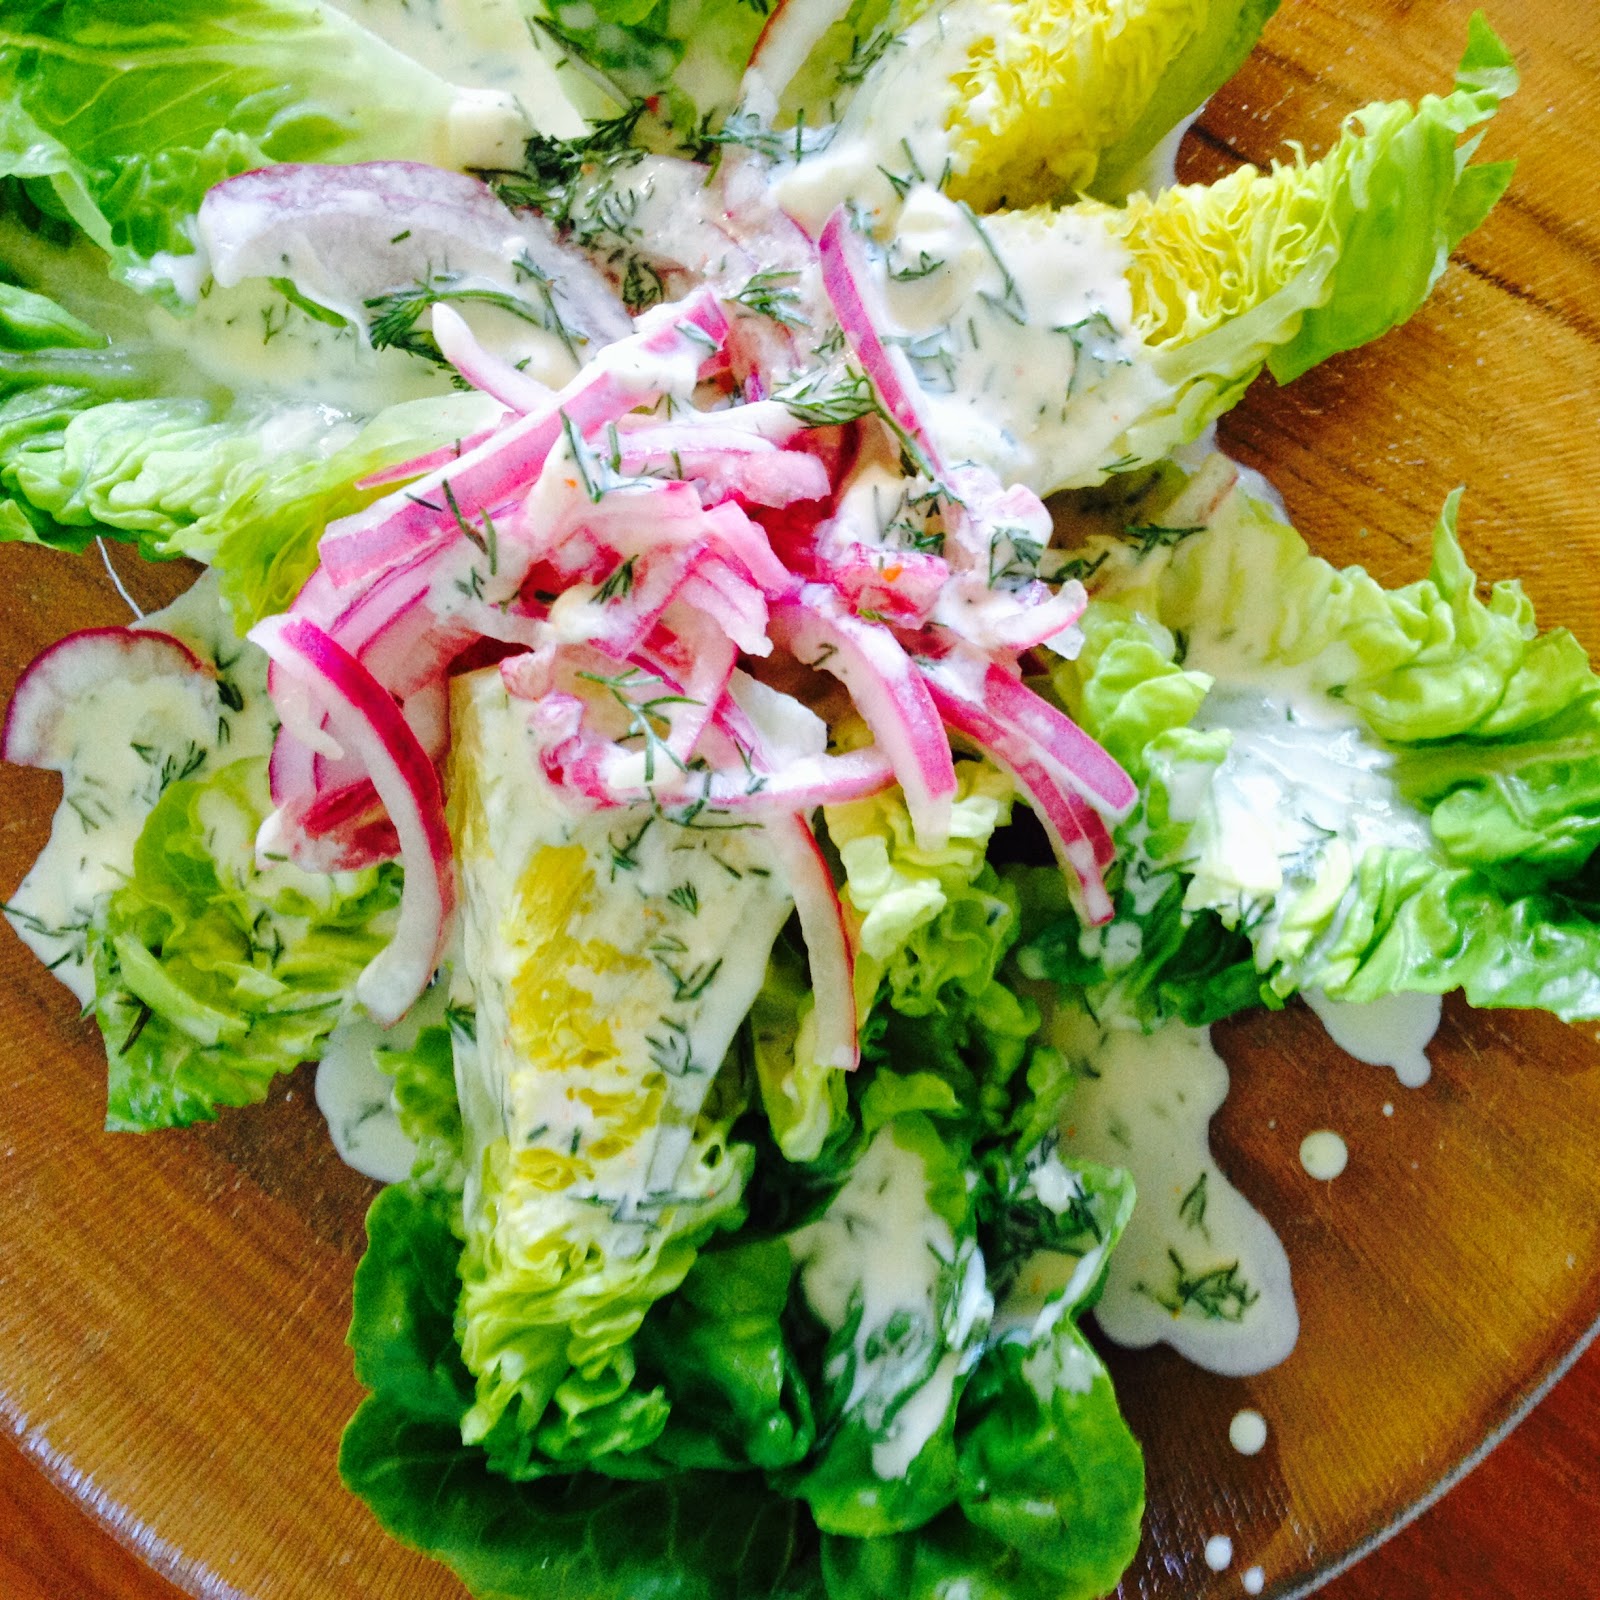 Iceberg Lettuce With Spicy Buttermilk Dressing Photo/Recipe: Lucy Corry/The Kitchenmaid